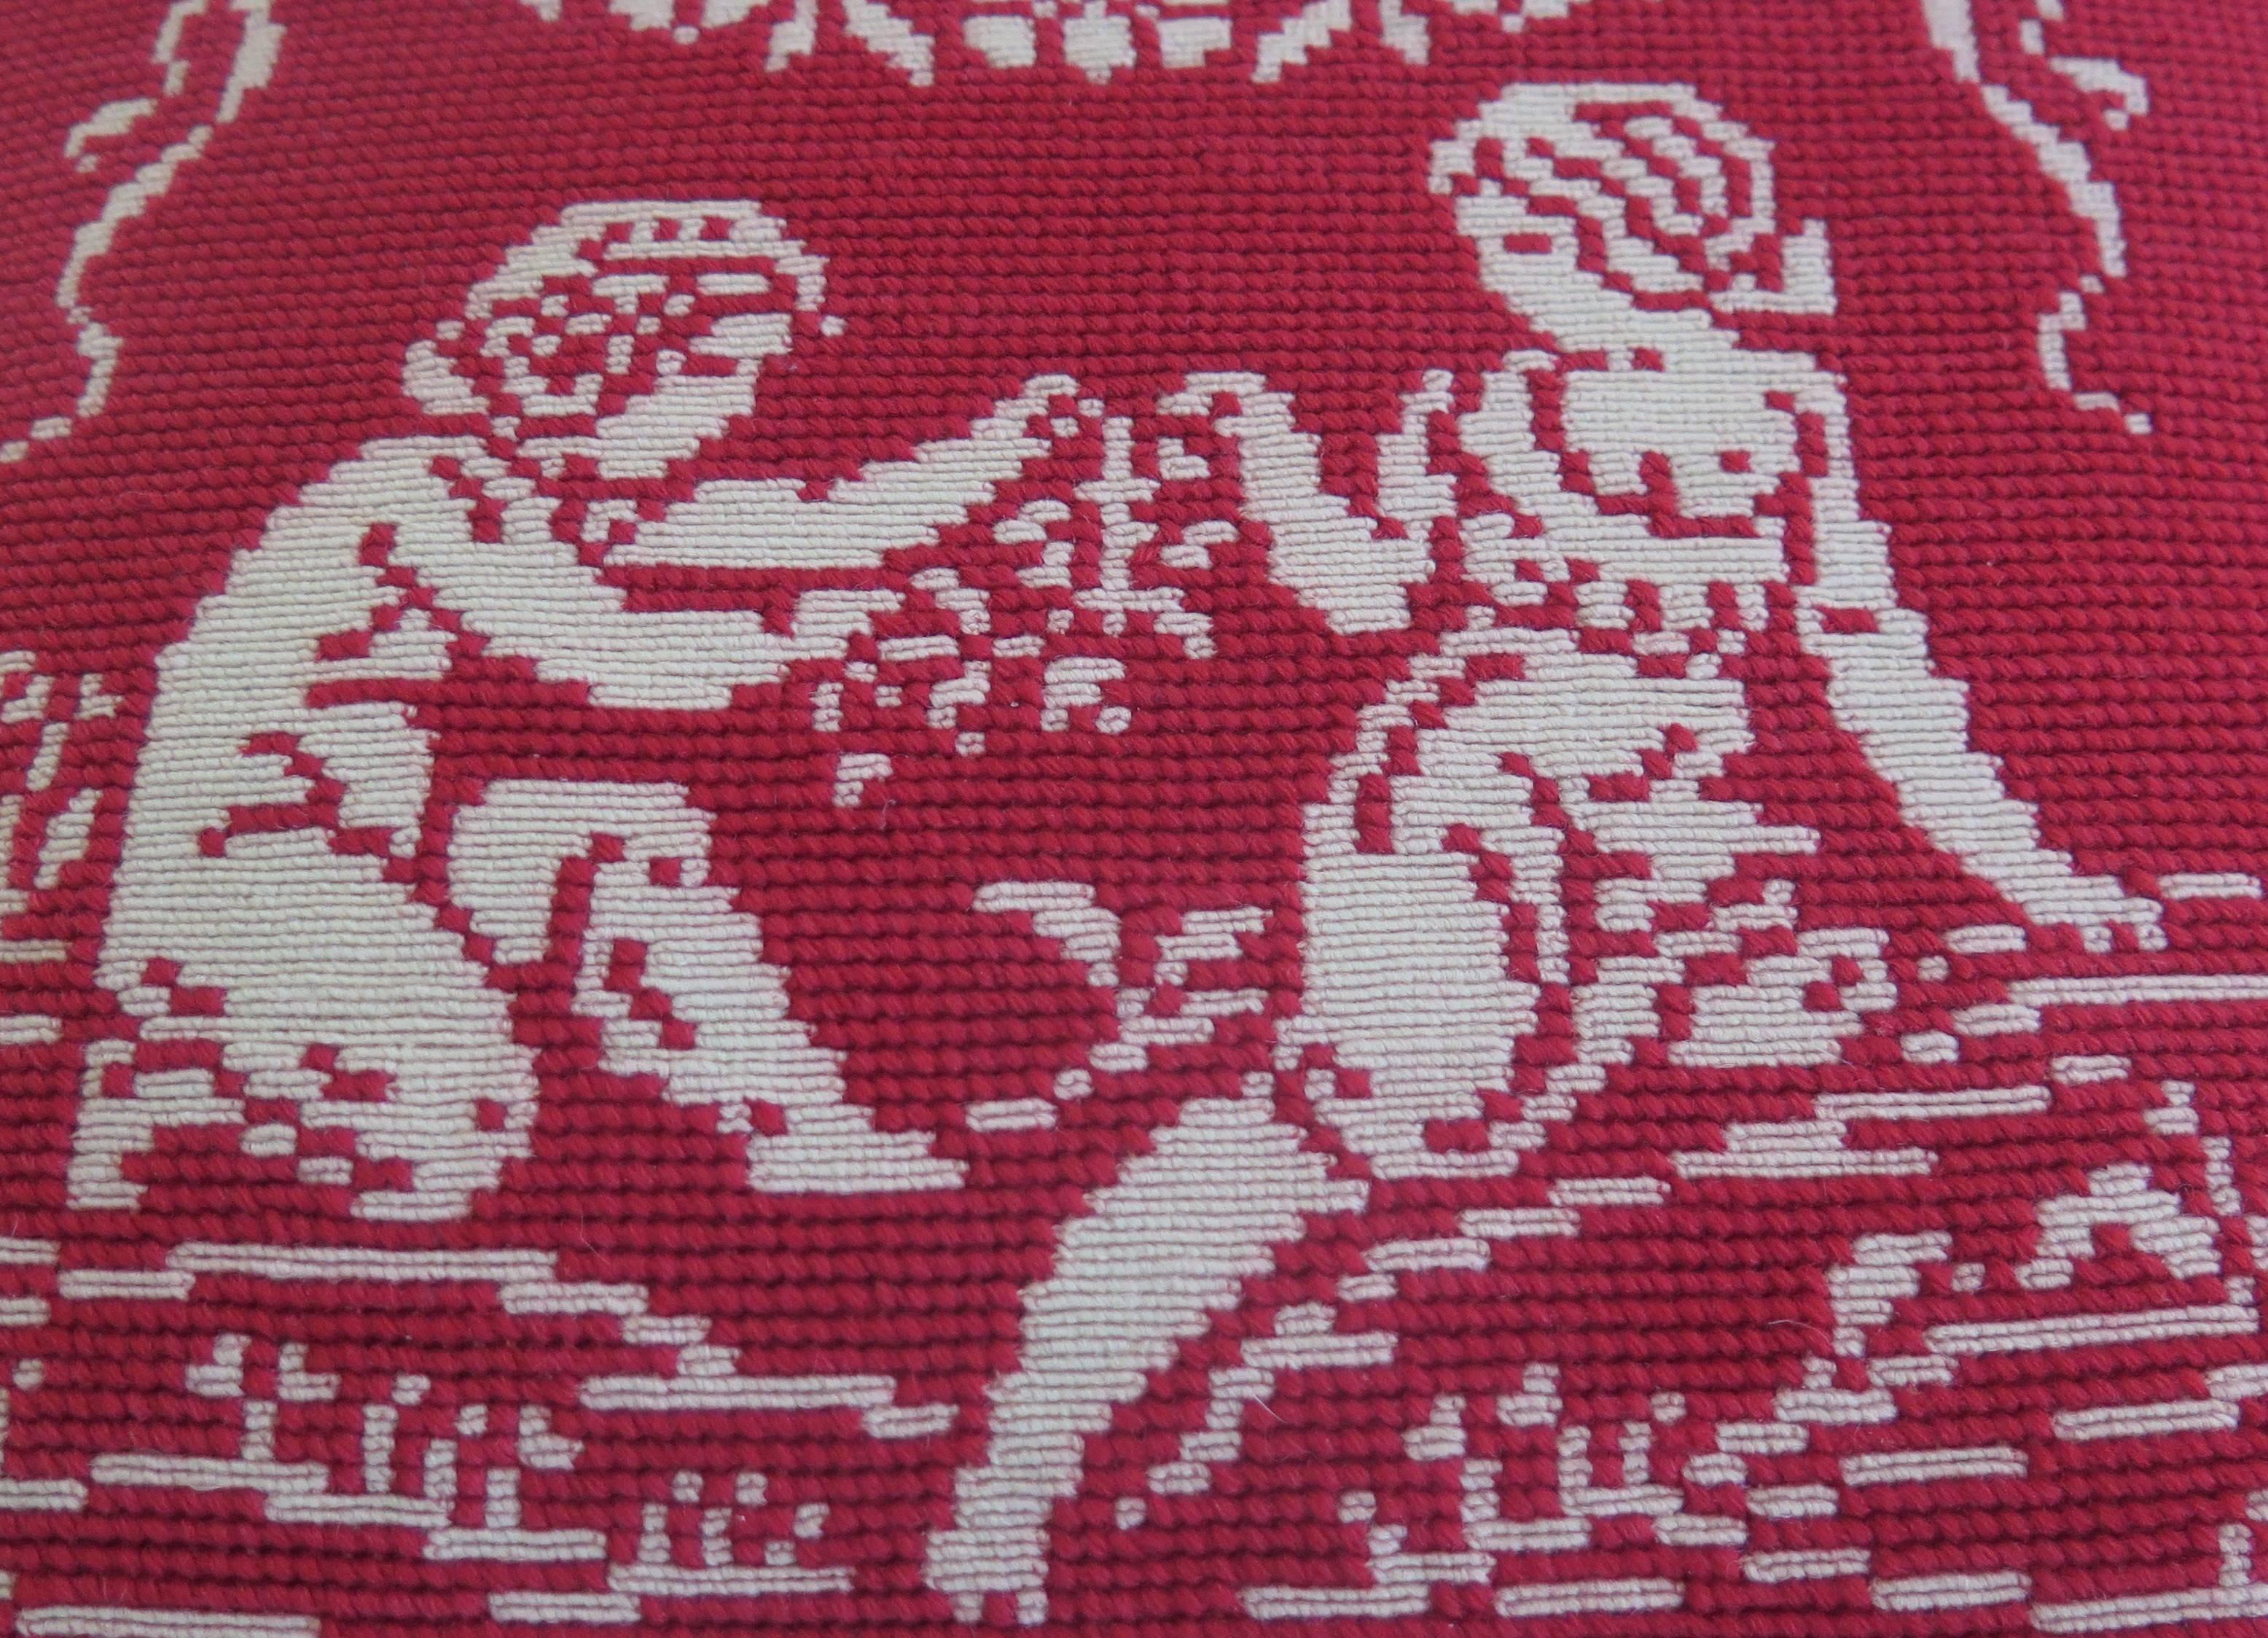 Hand-Crafted Late 19th Century Pillow or Cushion Needlepoint Tapestry of Classical Design